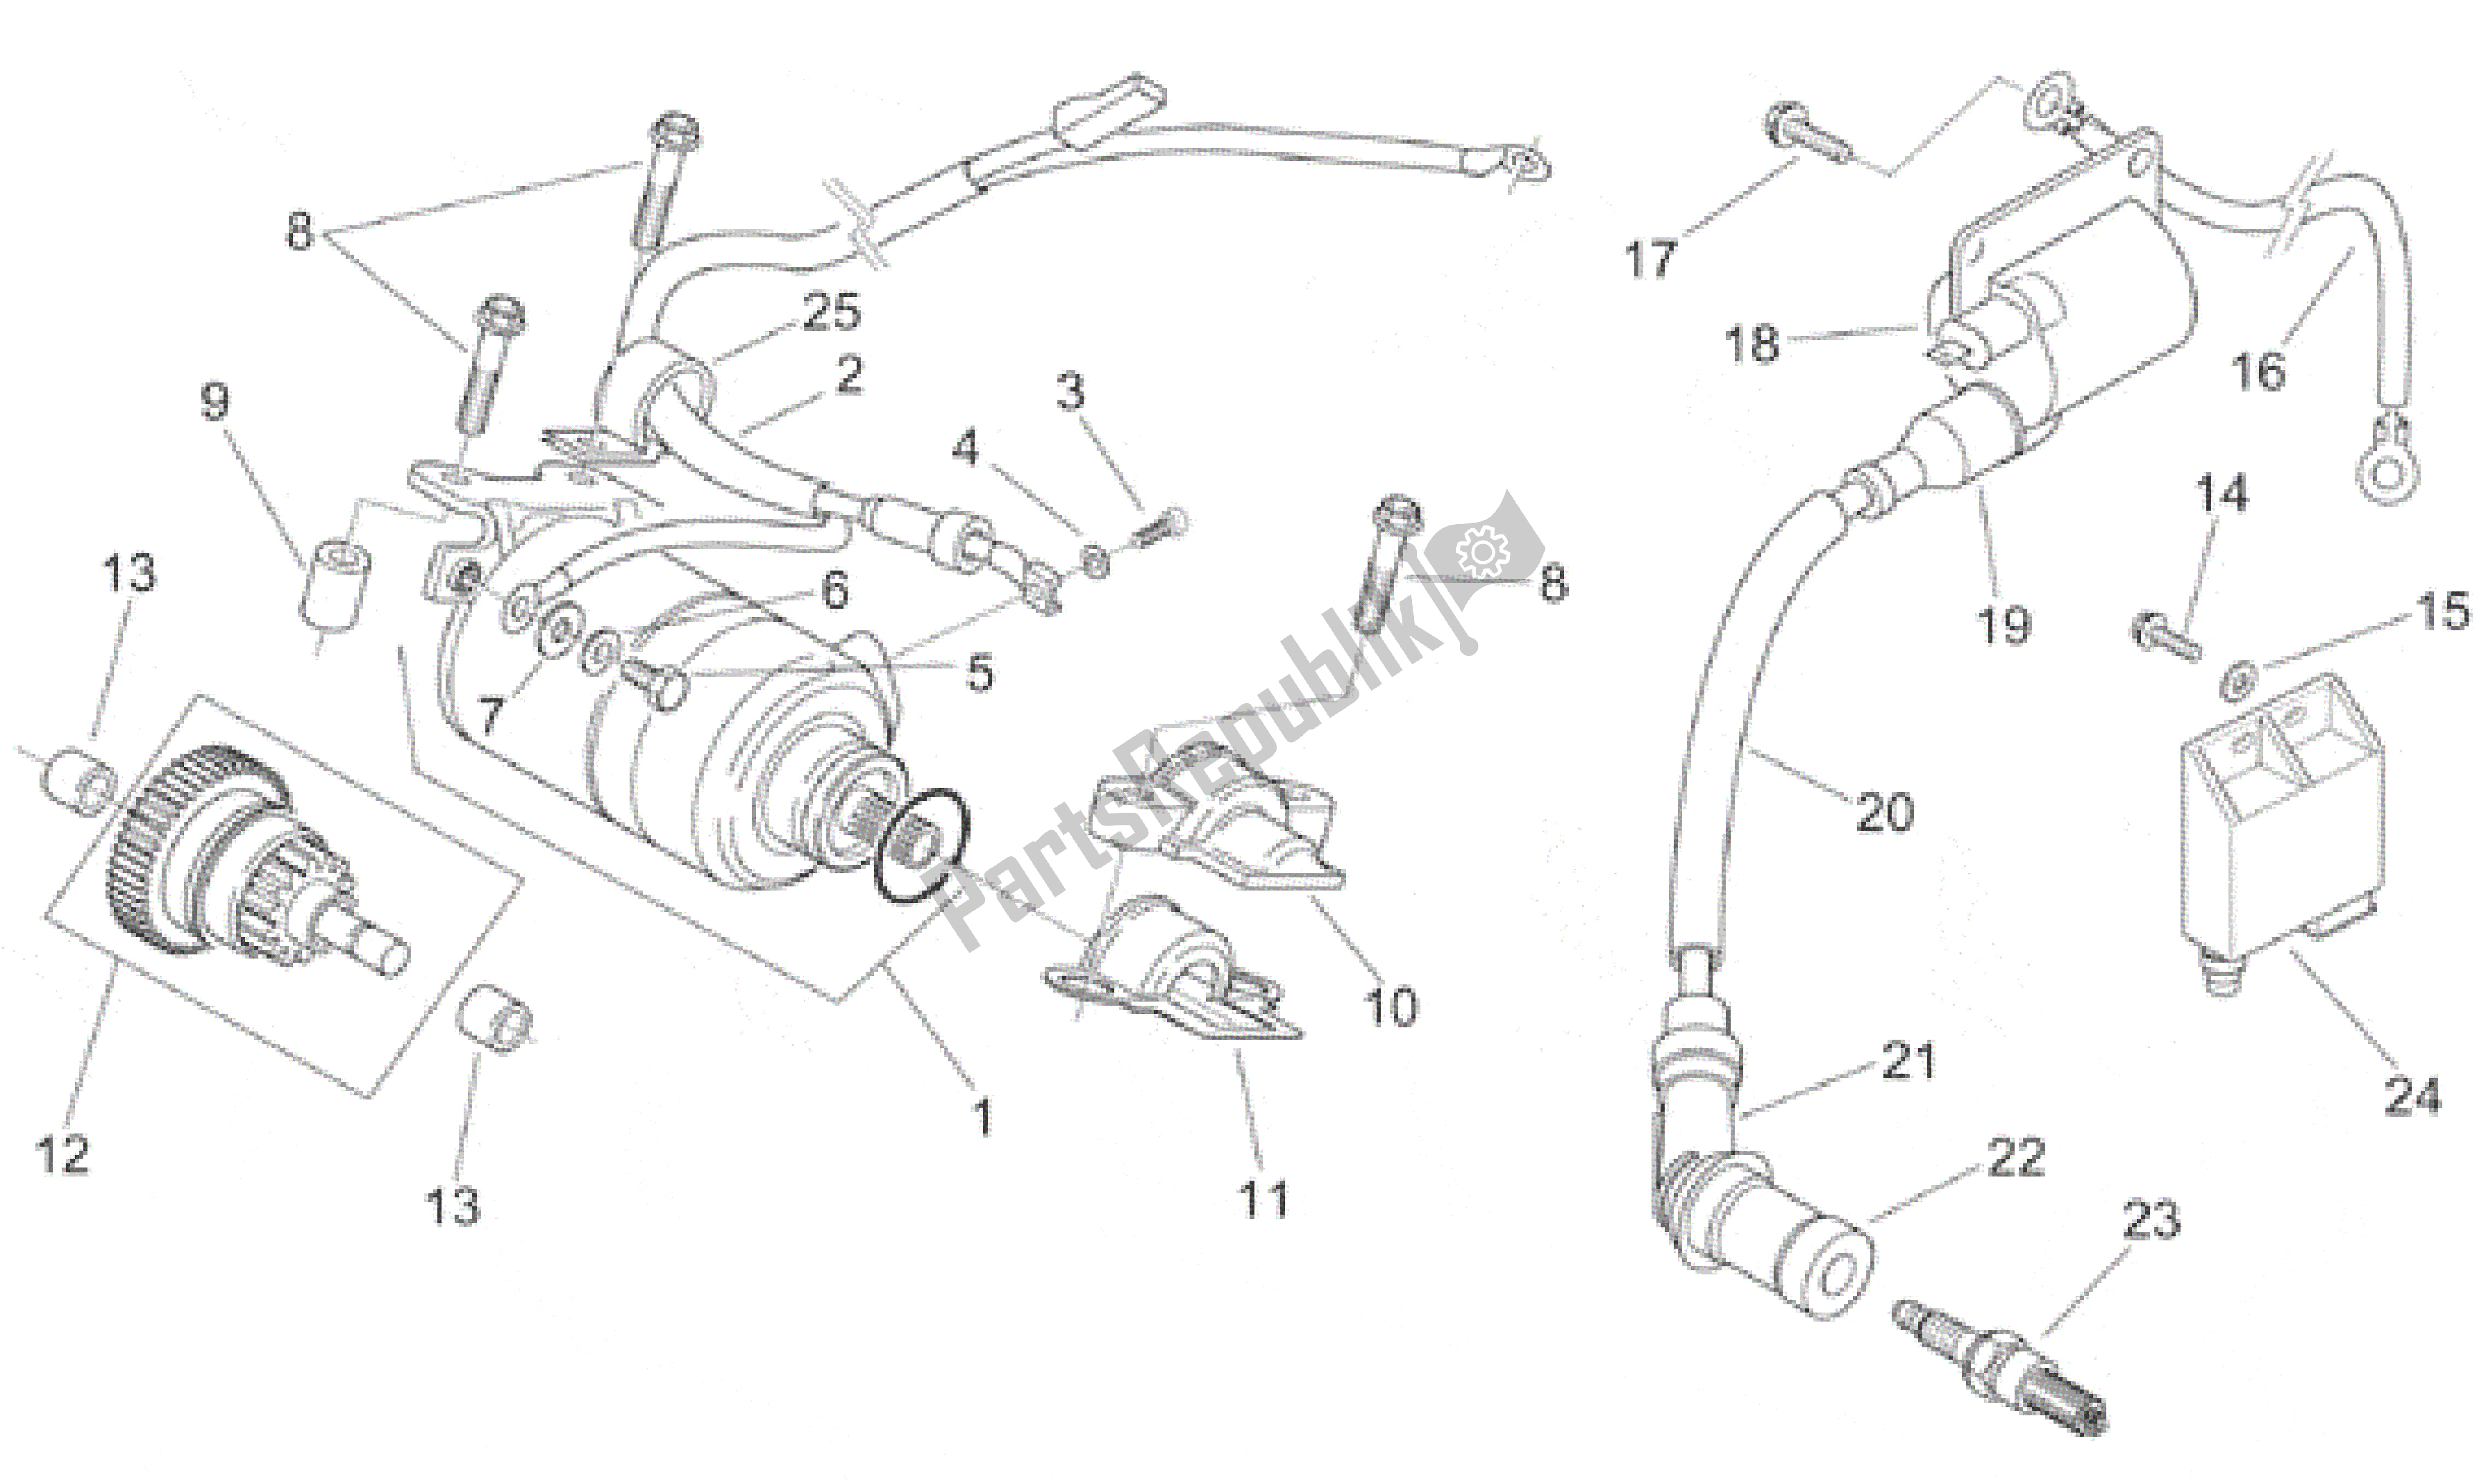 All parts for the Starter Motor - Ignition Unit of the Aprilia Habana 125 1999 - 2001